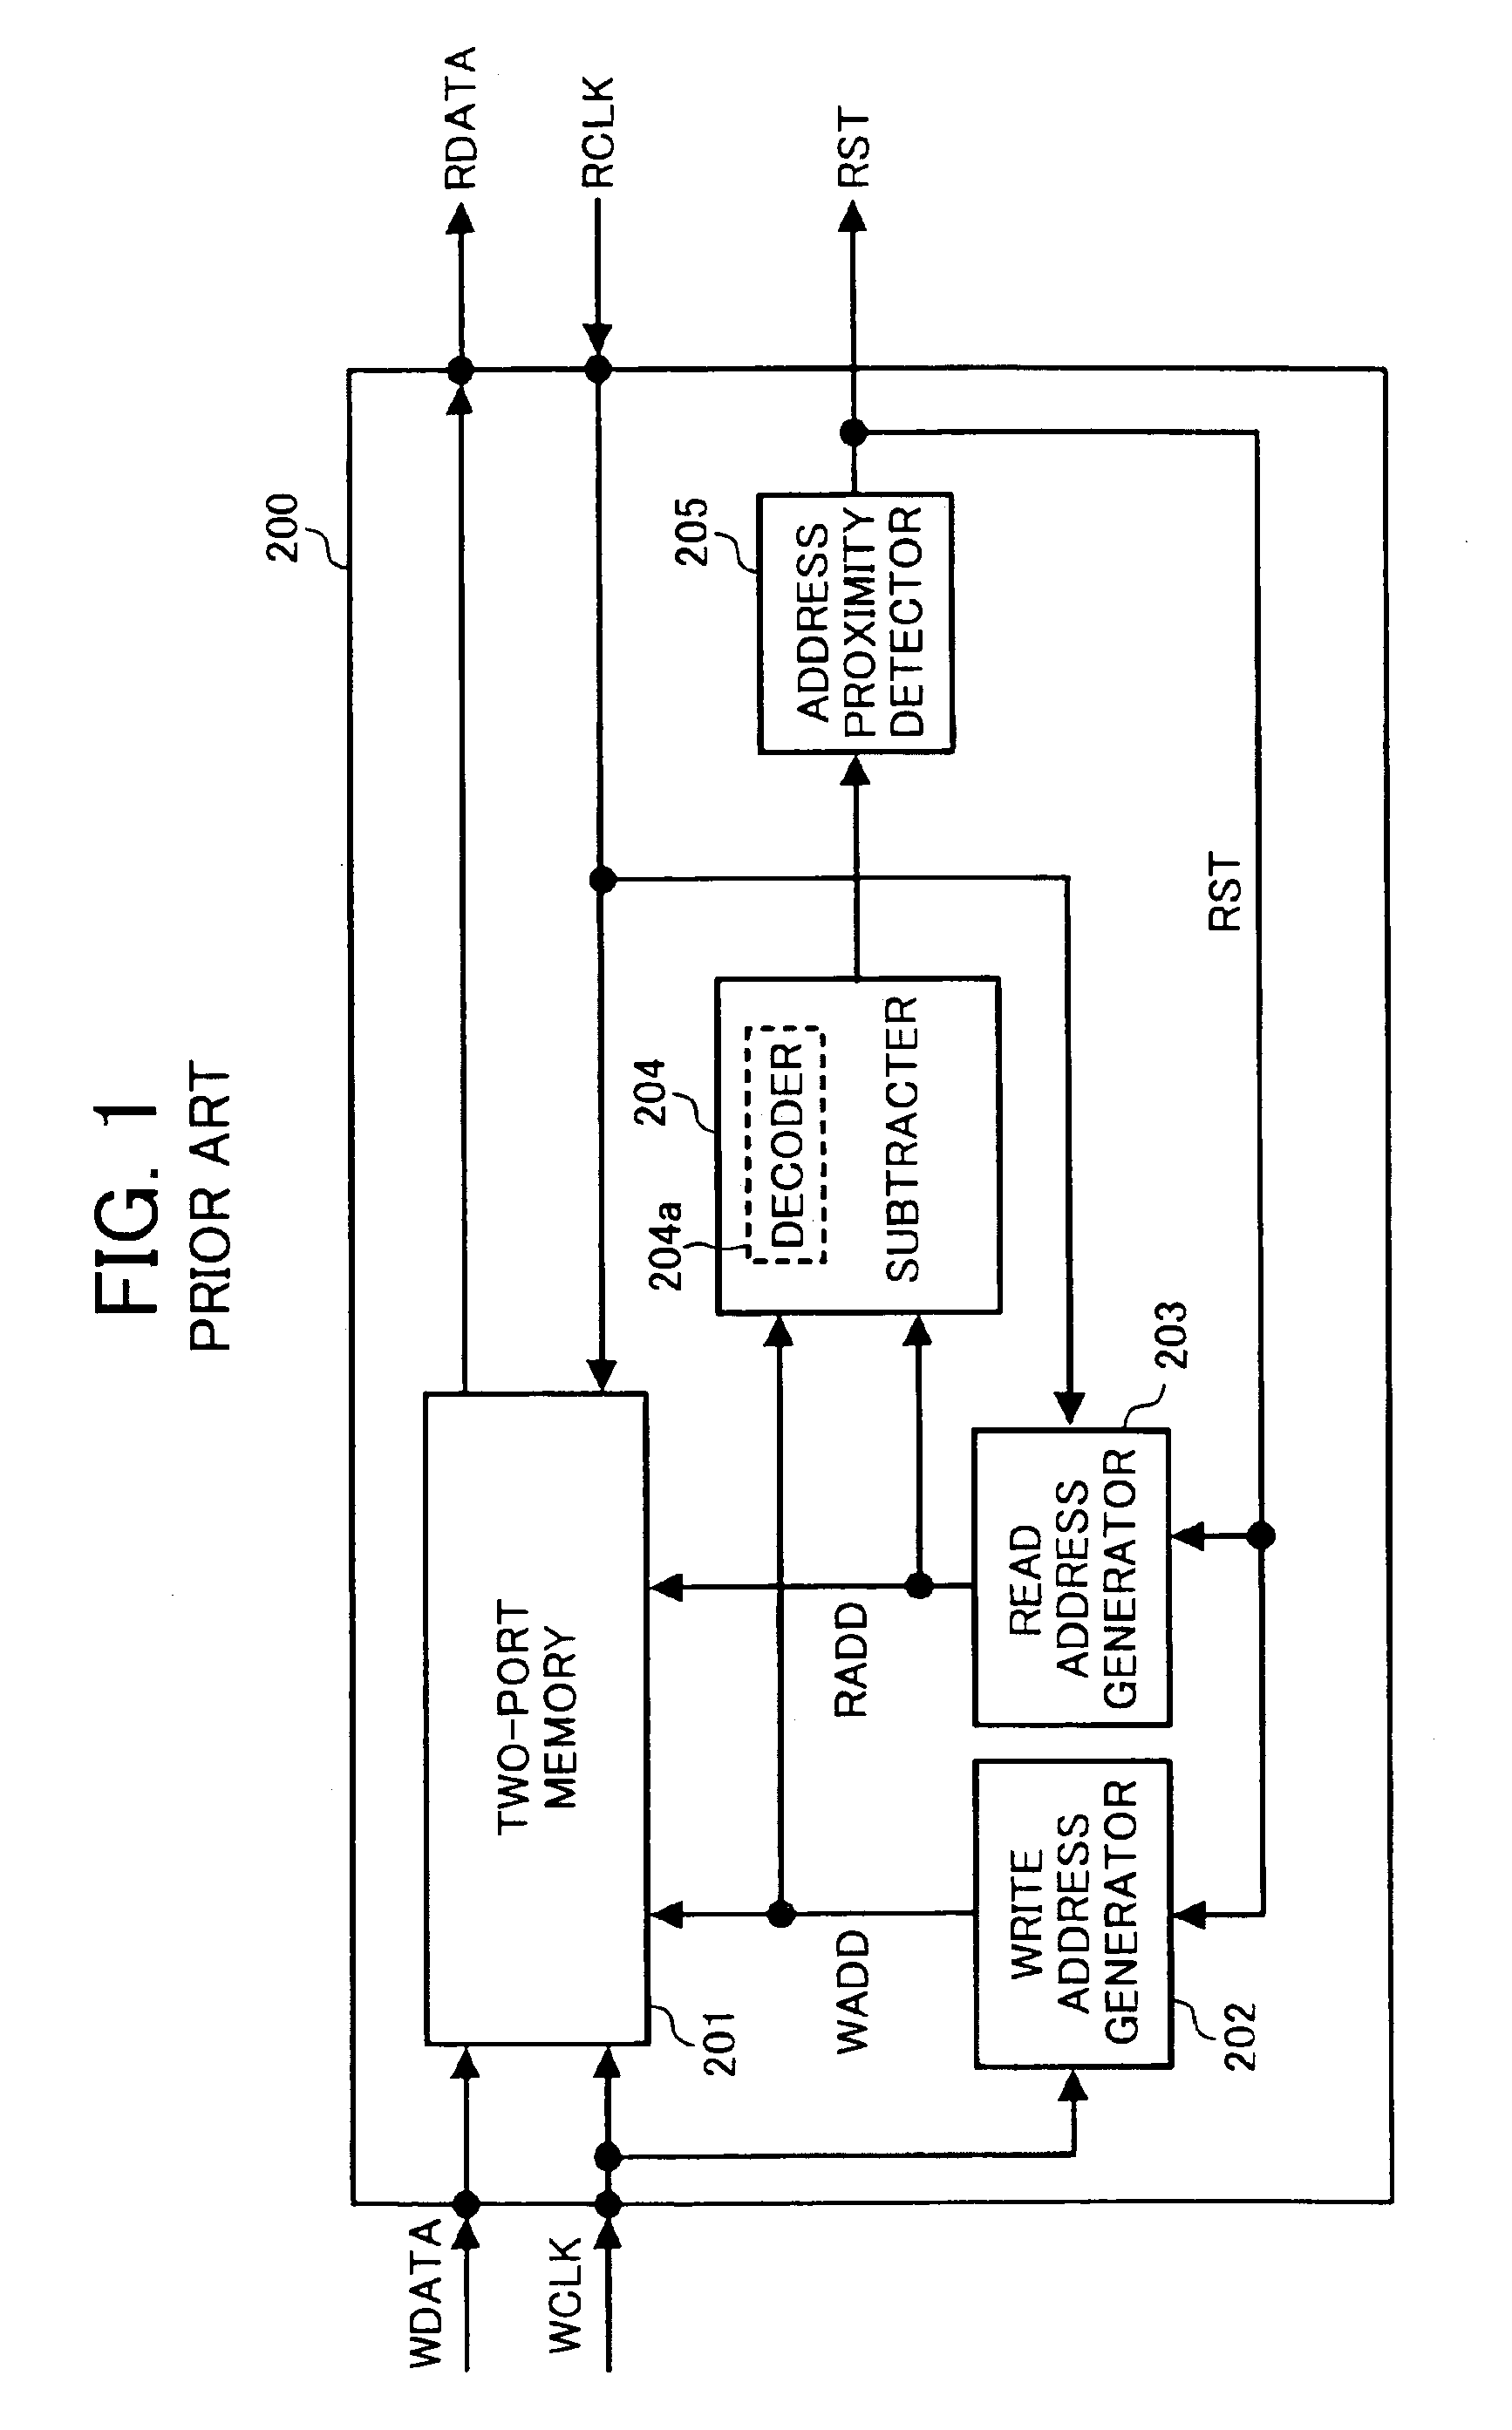 Method and circuit for elastic storing capable of adapting to high-speed data communications